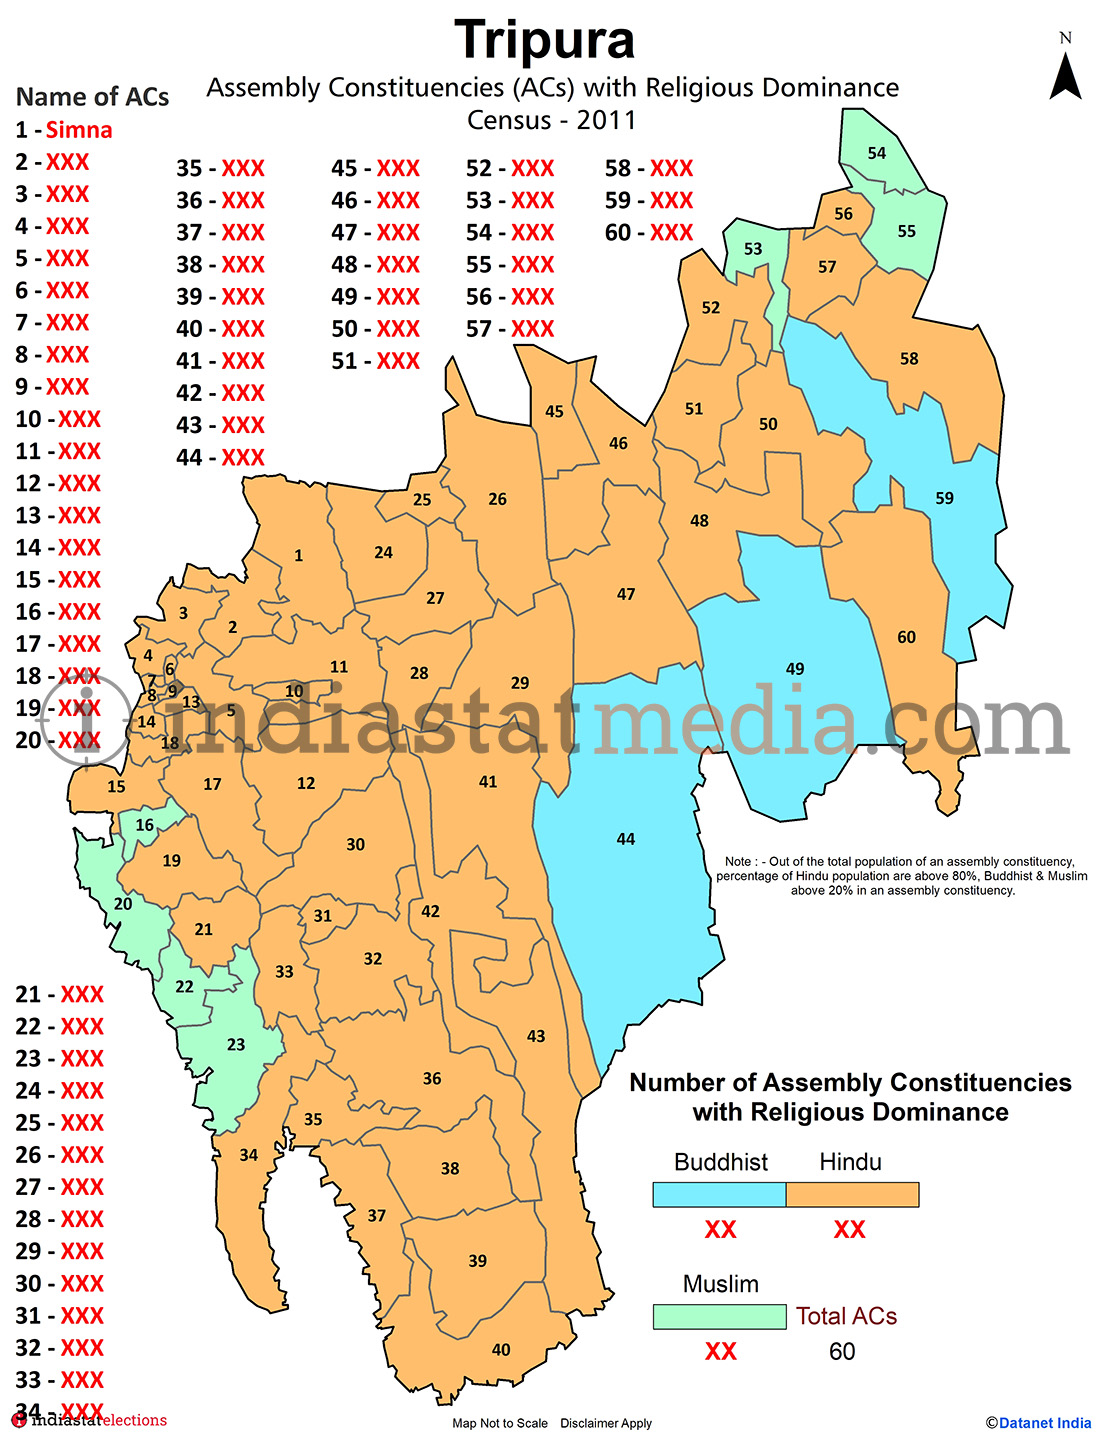 Assembly Constituencies (ACs) with Religious Dominance in Tripura - Census 2011